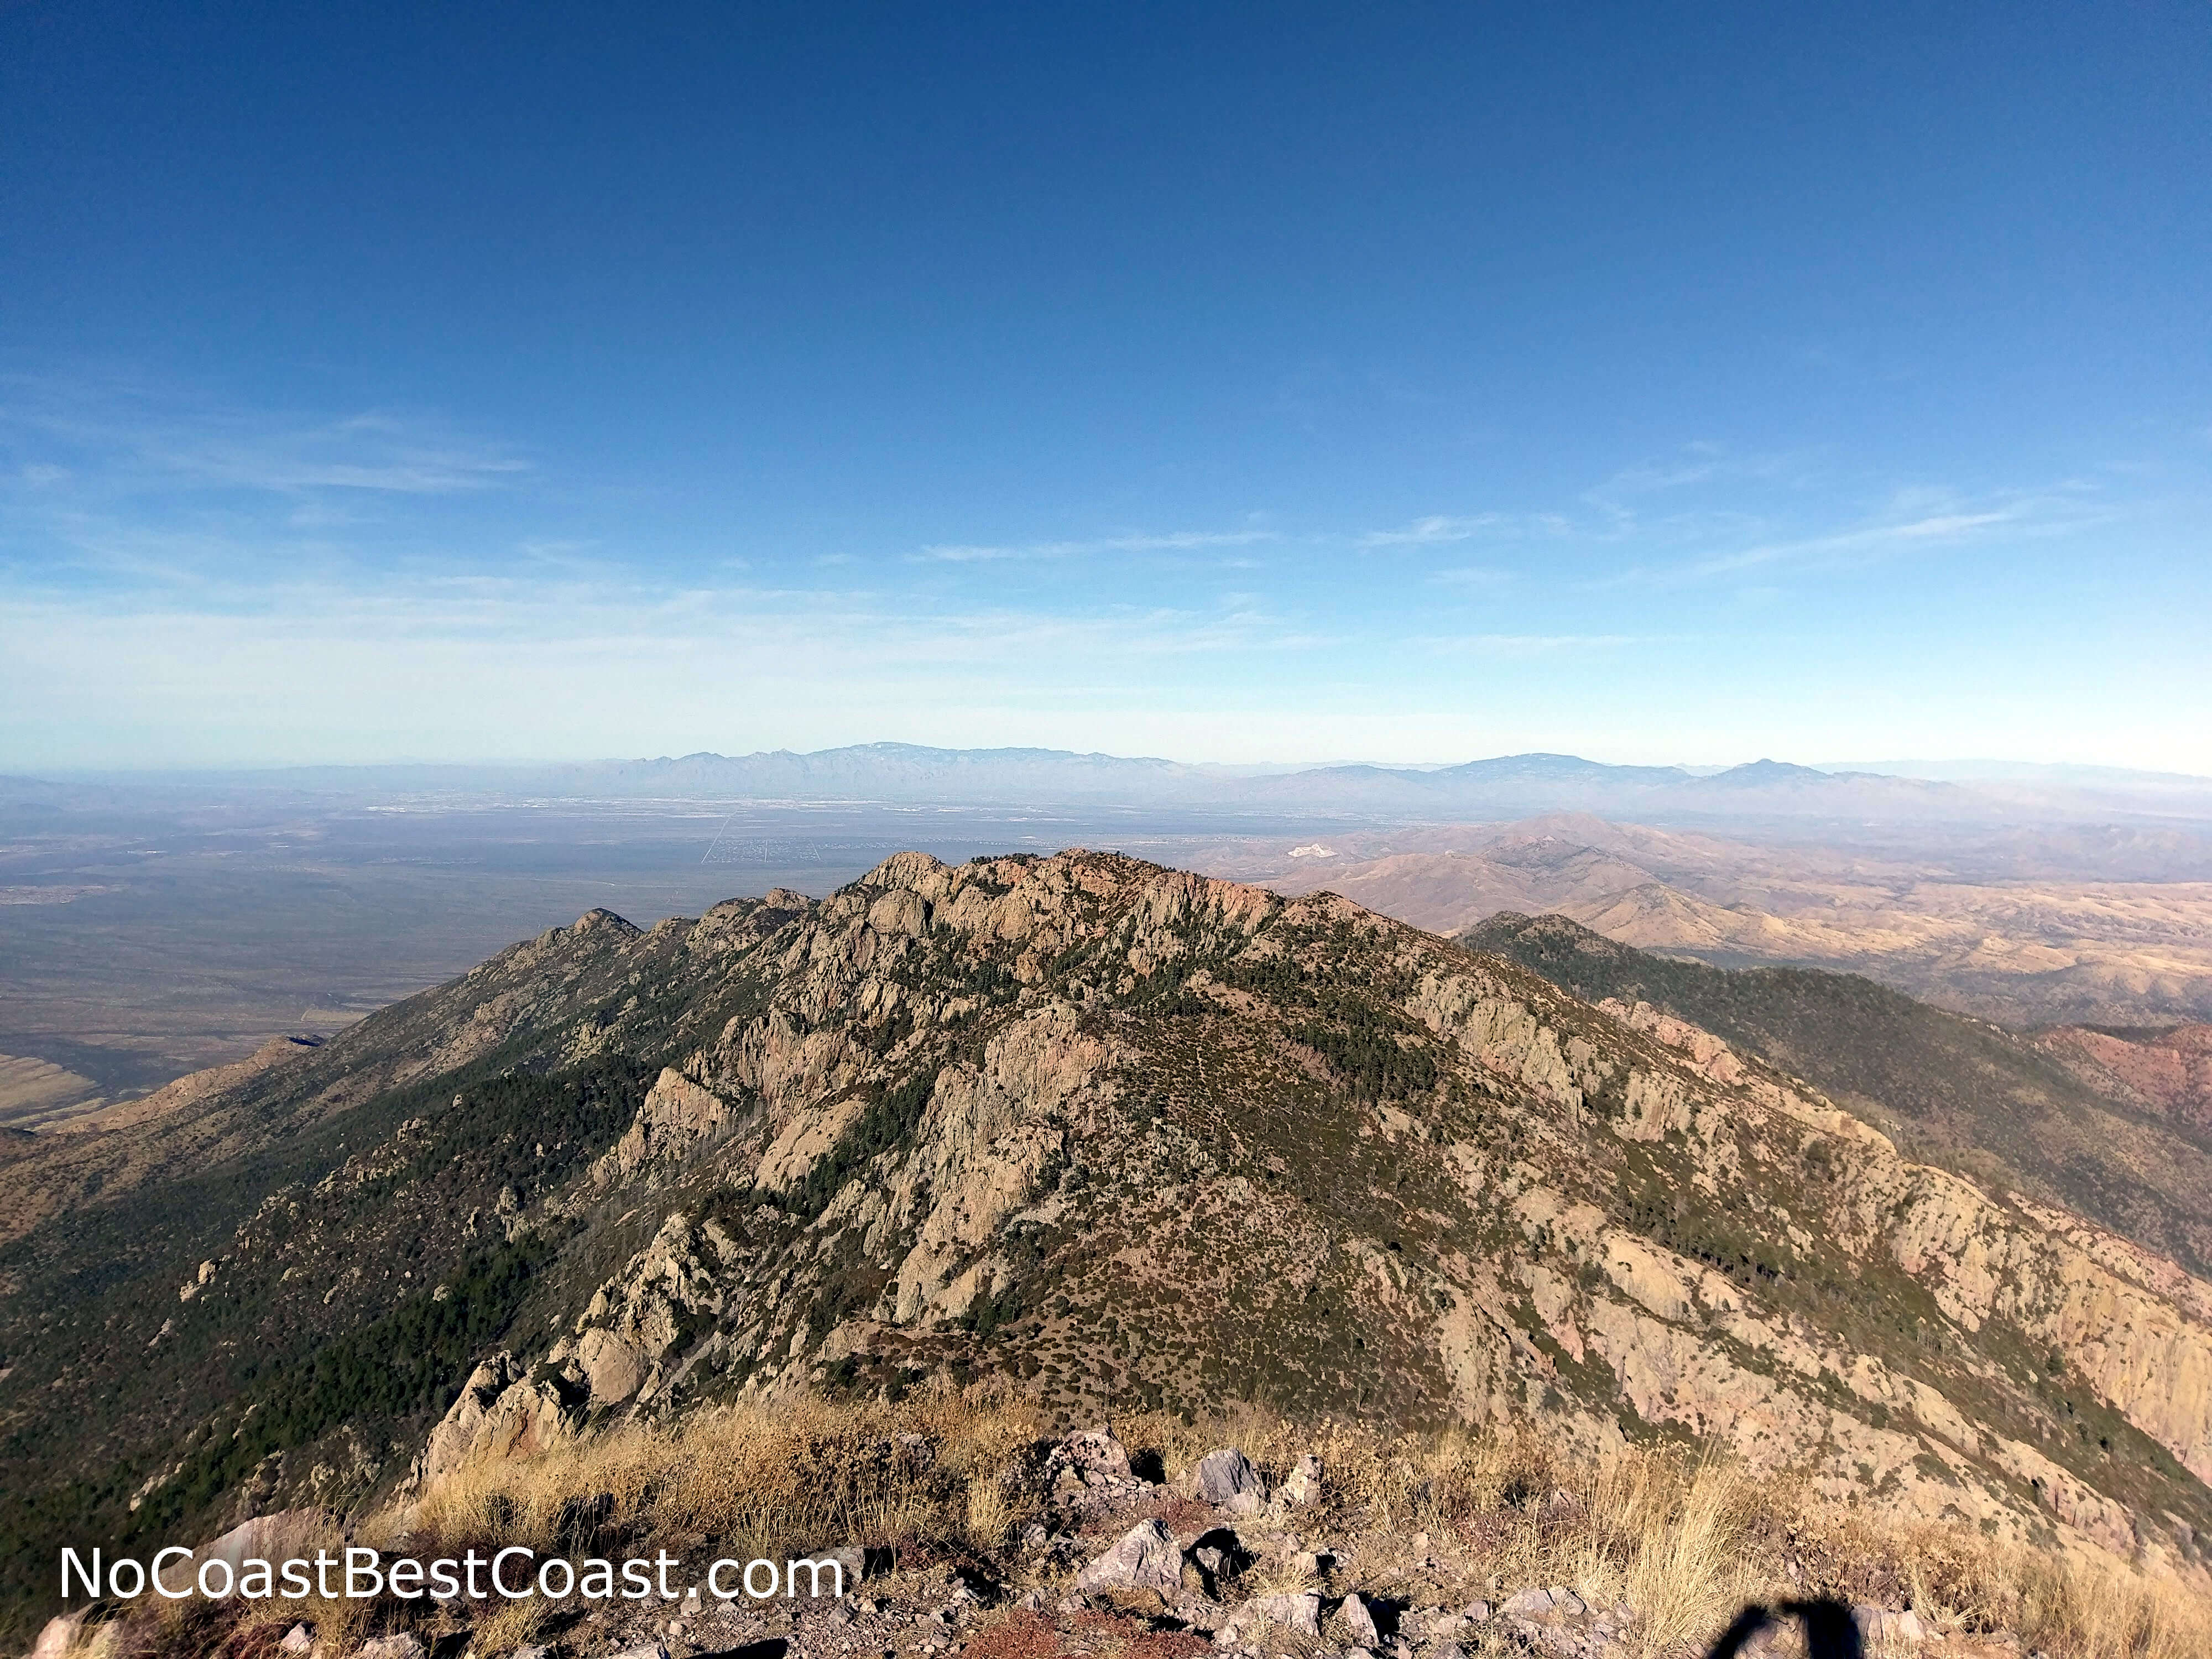 Looking north from the summit towards Tucson and Mt. Lemmon